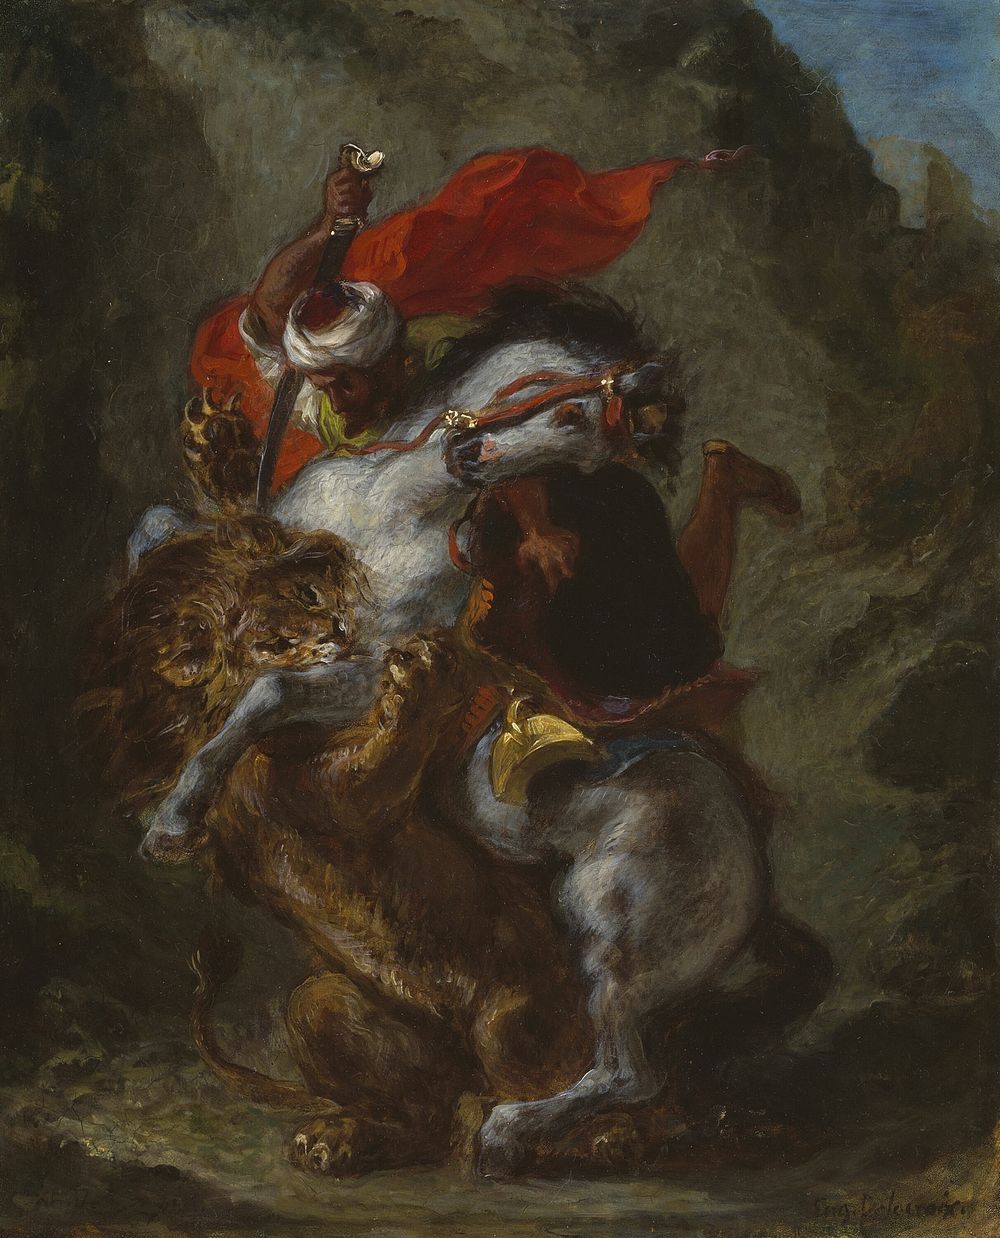 Arab Horseman Attacked by a Lion by Eugène Delacroix